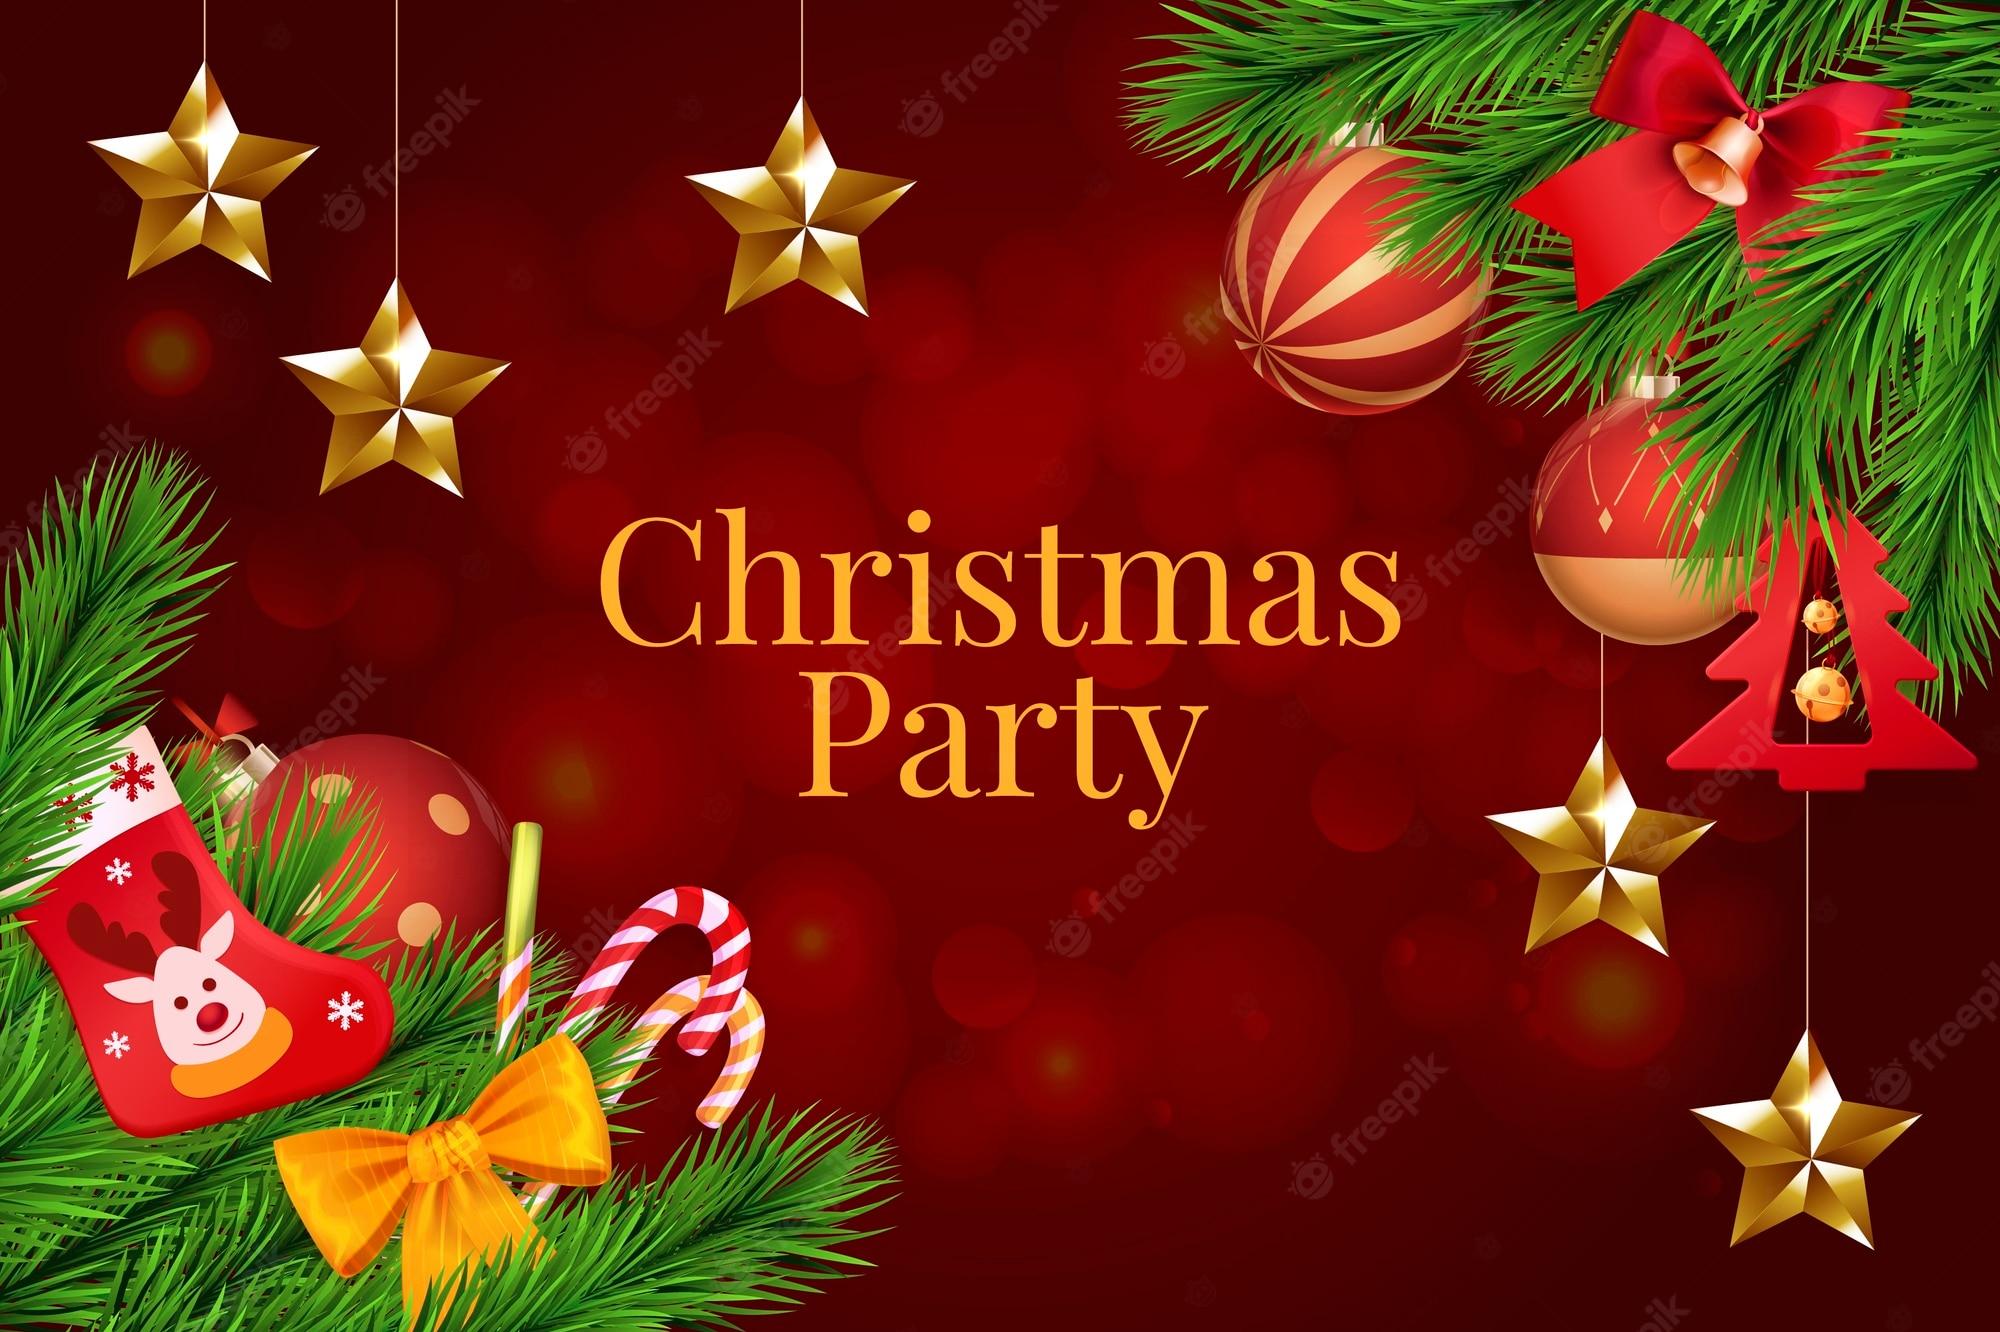 Christmas Party Background Images Hd - Infoupdate.org